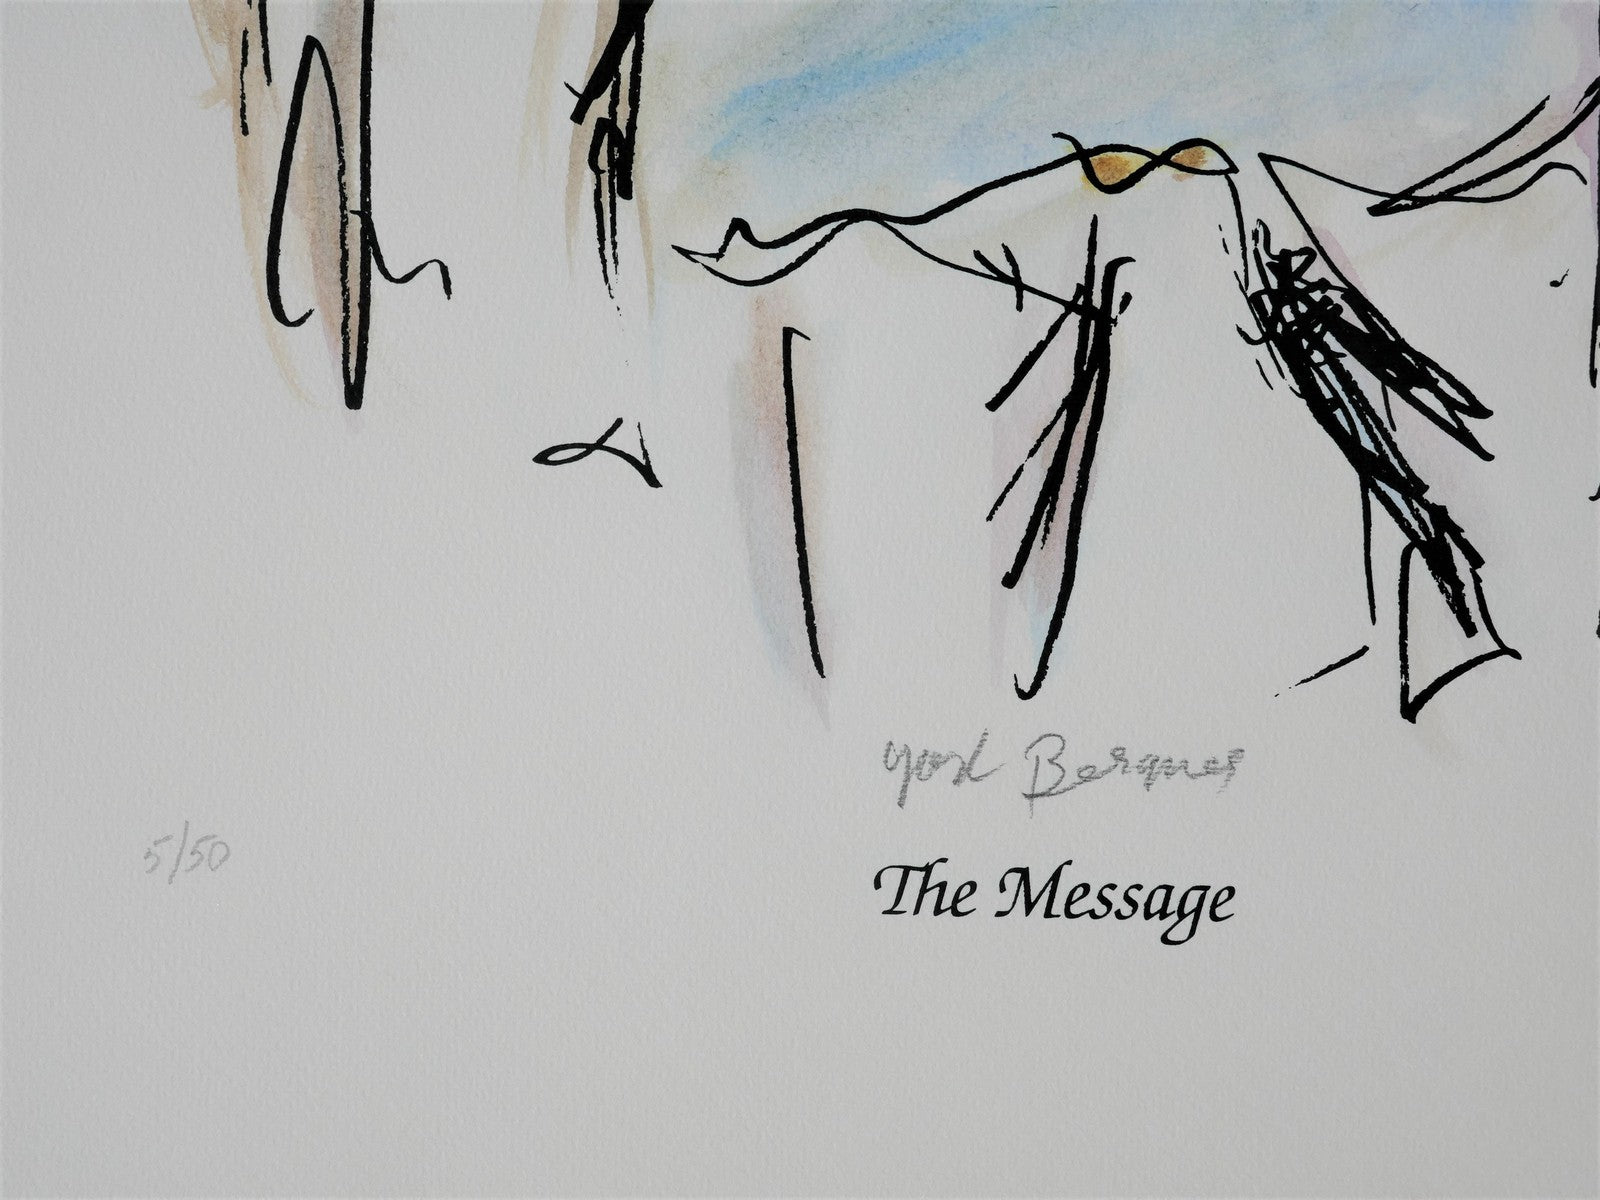 Yosl Bergner 'The Message, from The Kimberley Album'